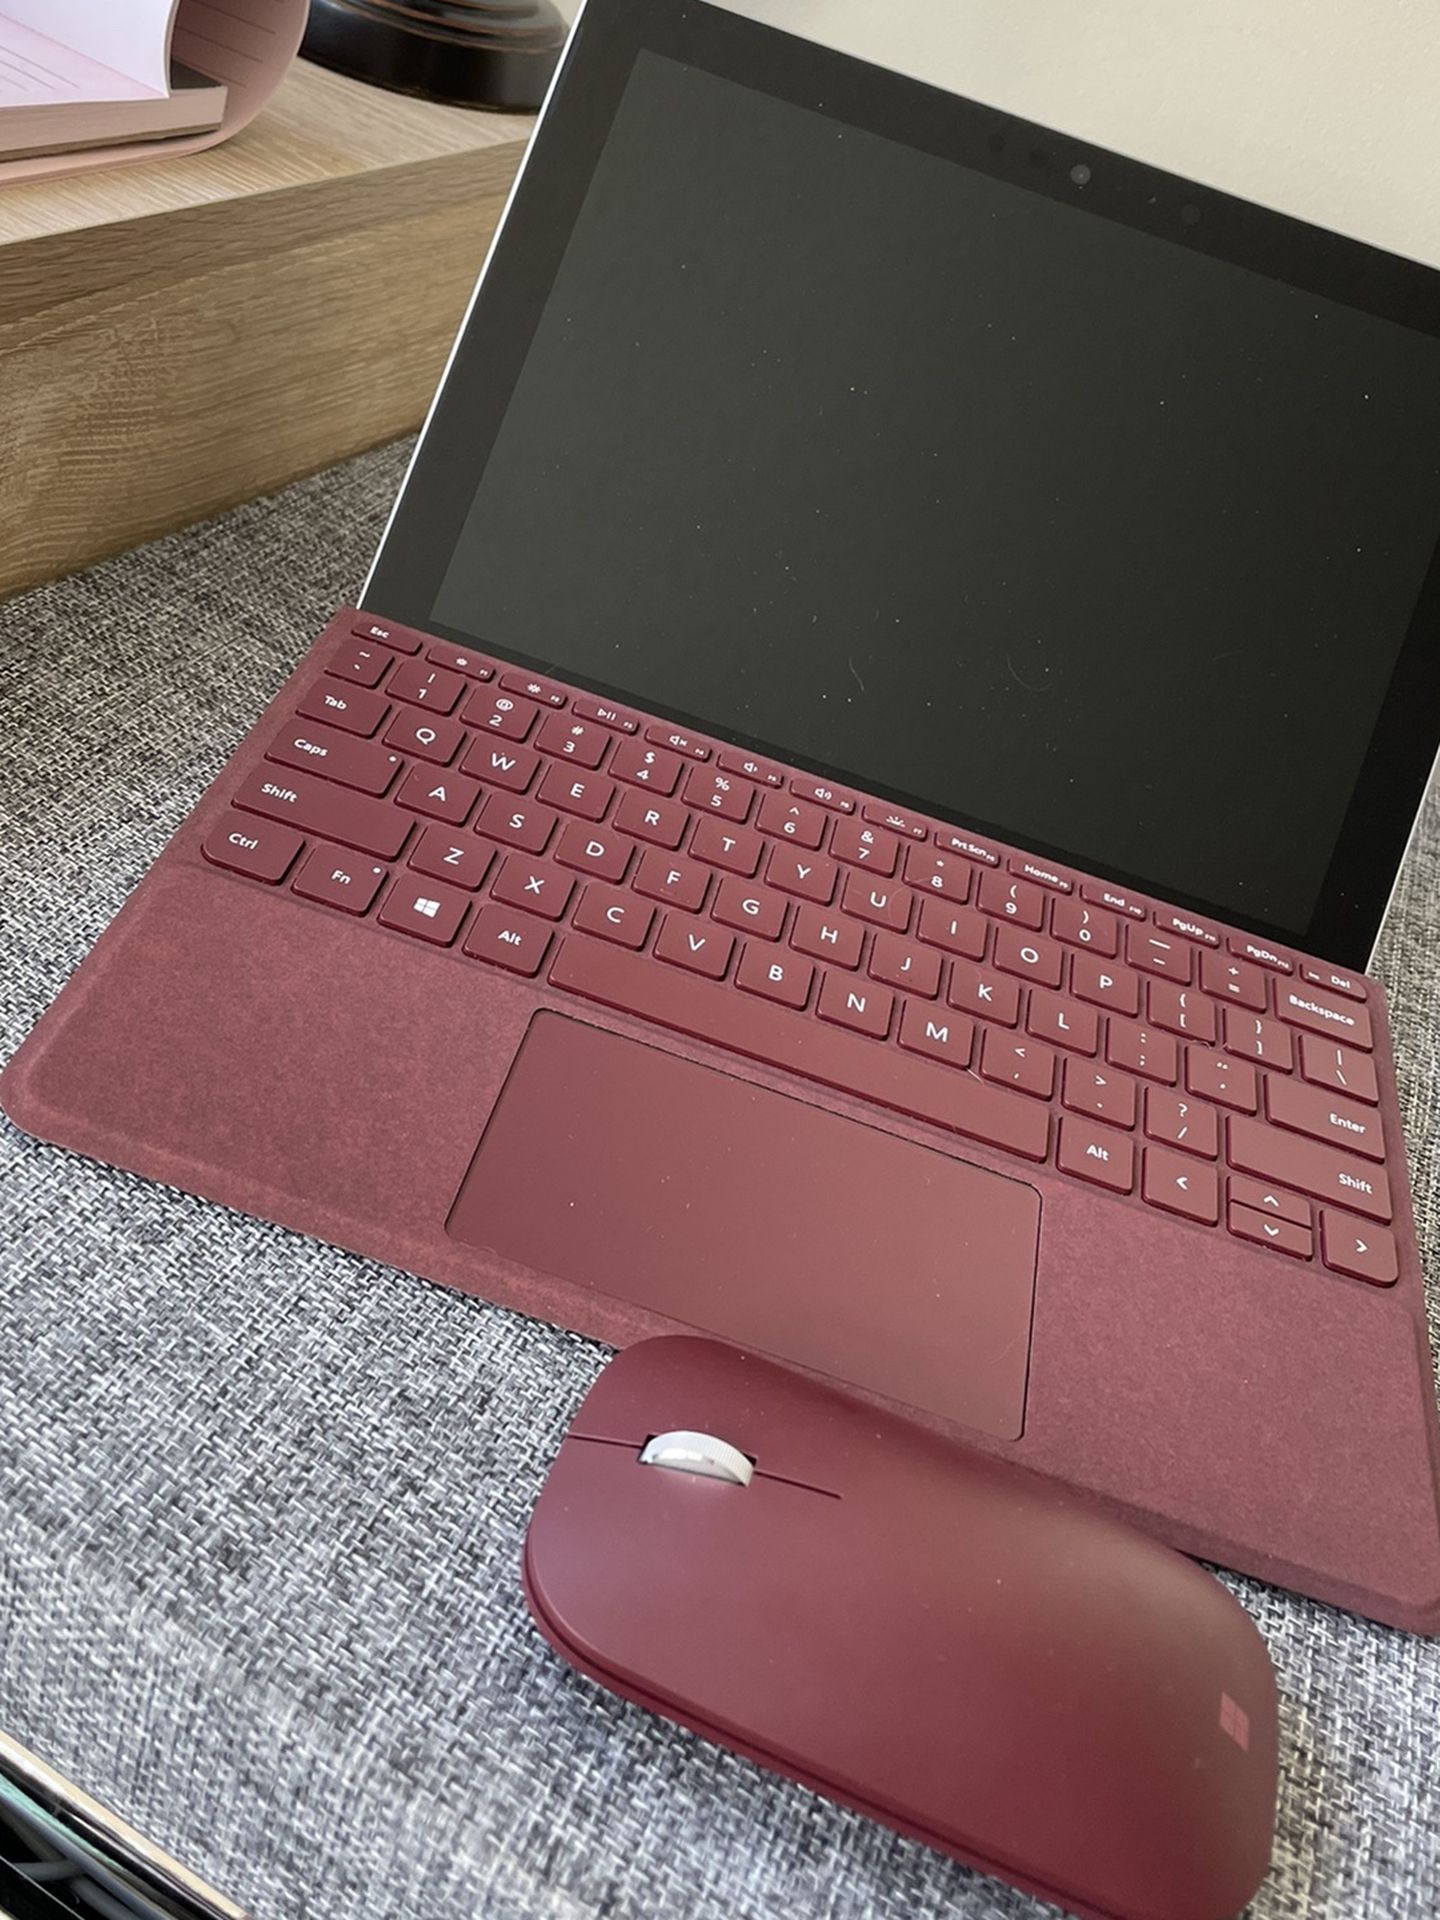 Microsoft Surface Go with wireless keyboard and mouse